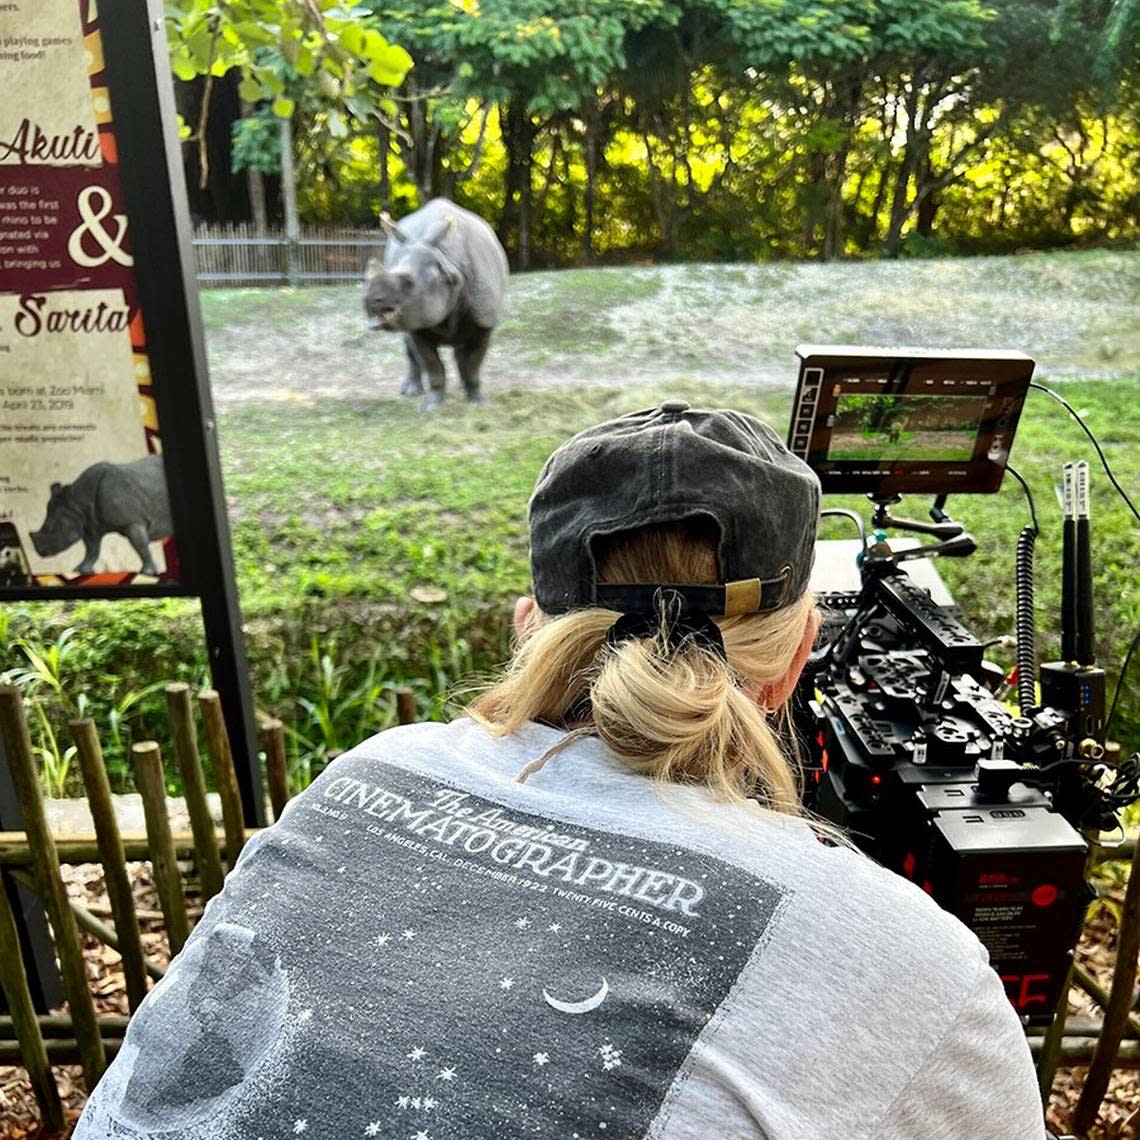 Action! Akuti, a greater one-horned rhino at Zoo Miami, on the set at Zoo Miami, for her performance in a coming film tentatively titled, “Omni Loop.” The production team and director shot scenes featuring the rhino at Zoo Miami on Sept. 6, 2022.